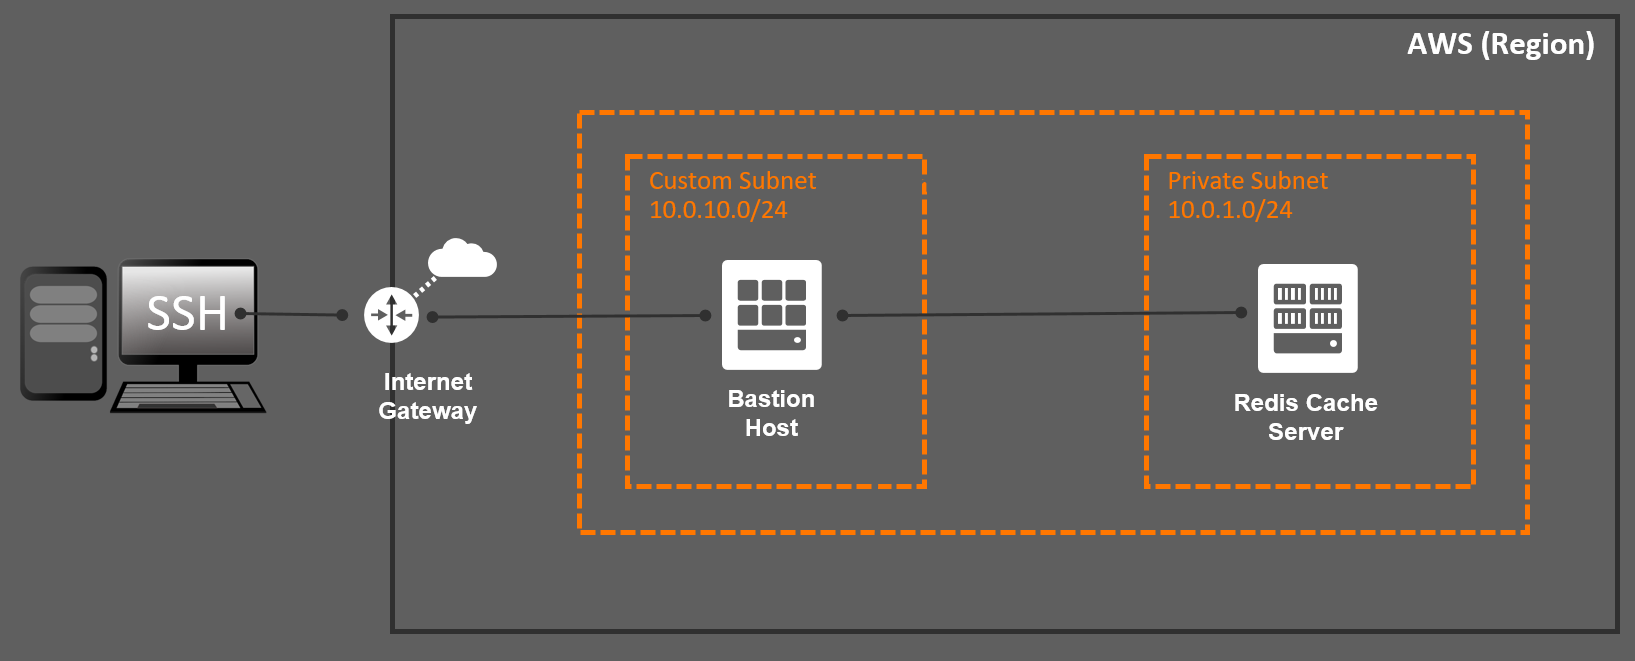 aws bastion host private subnet